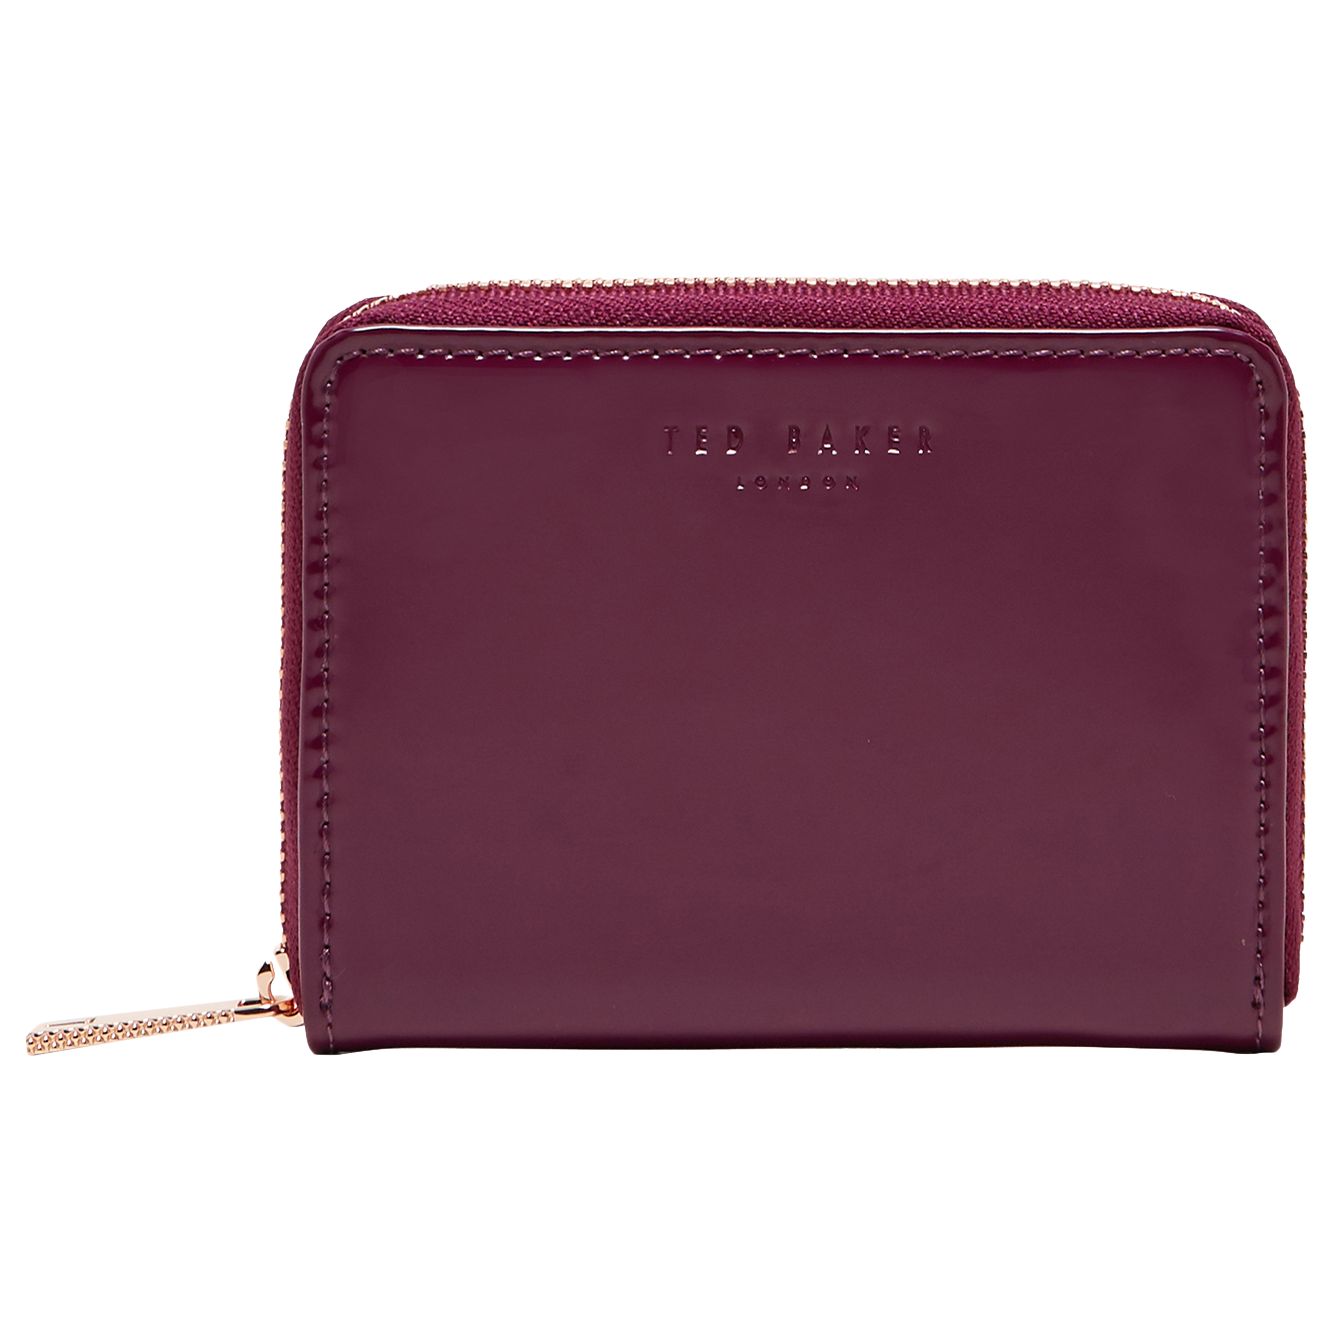 Ted Baker Omarion Leather Mini Purse at John Lewis & Partners